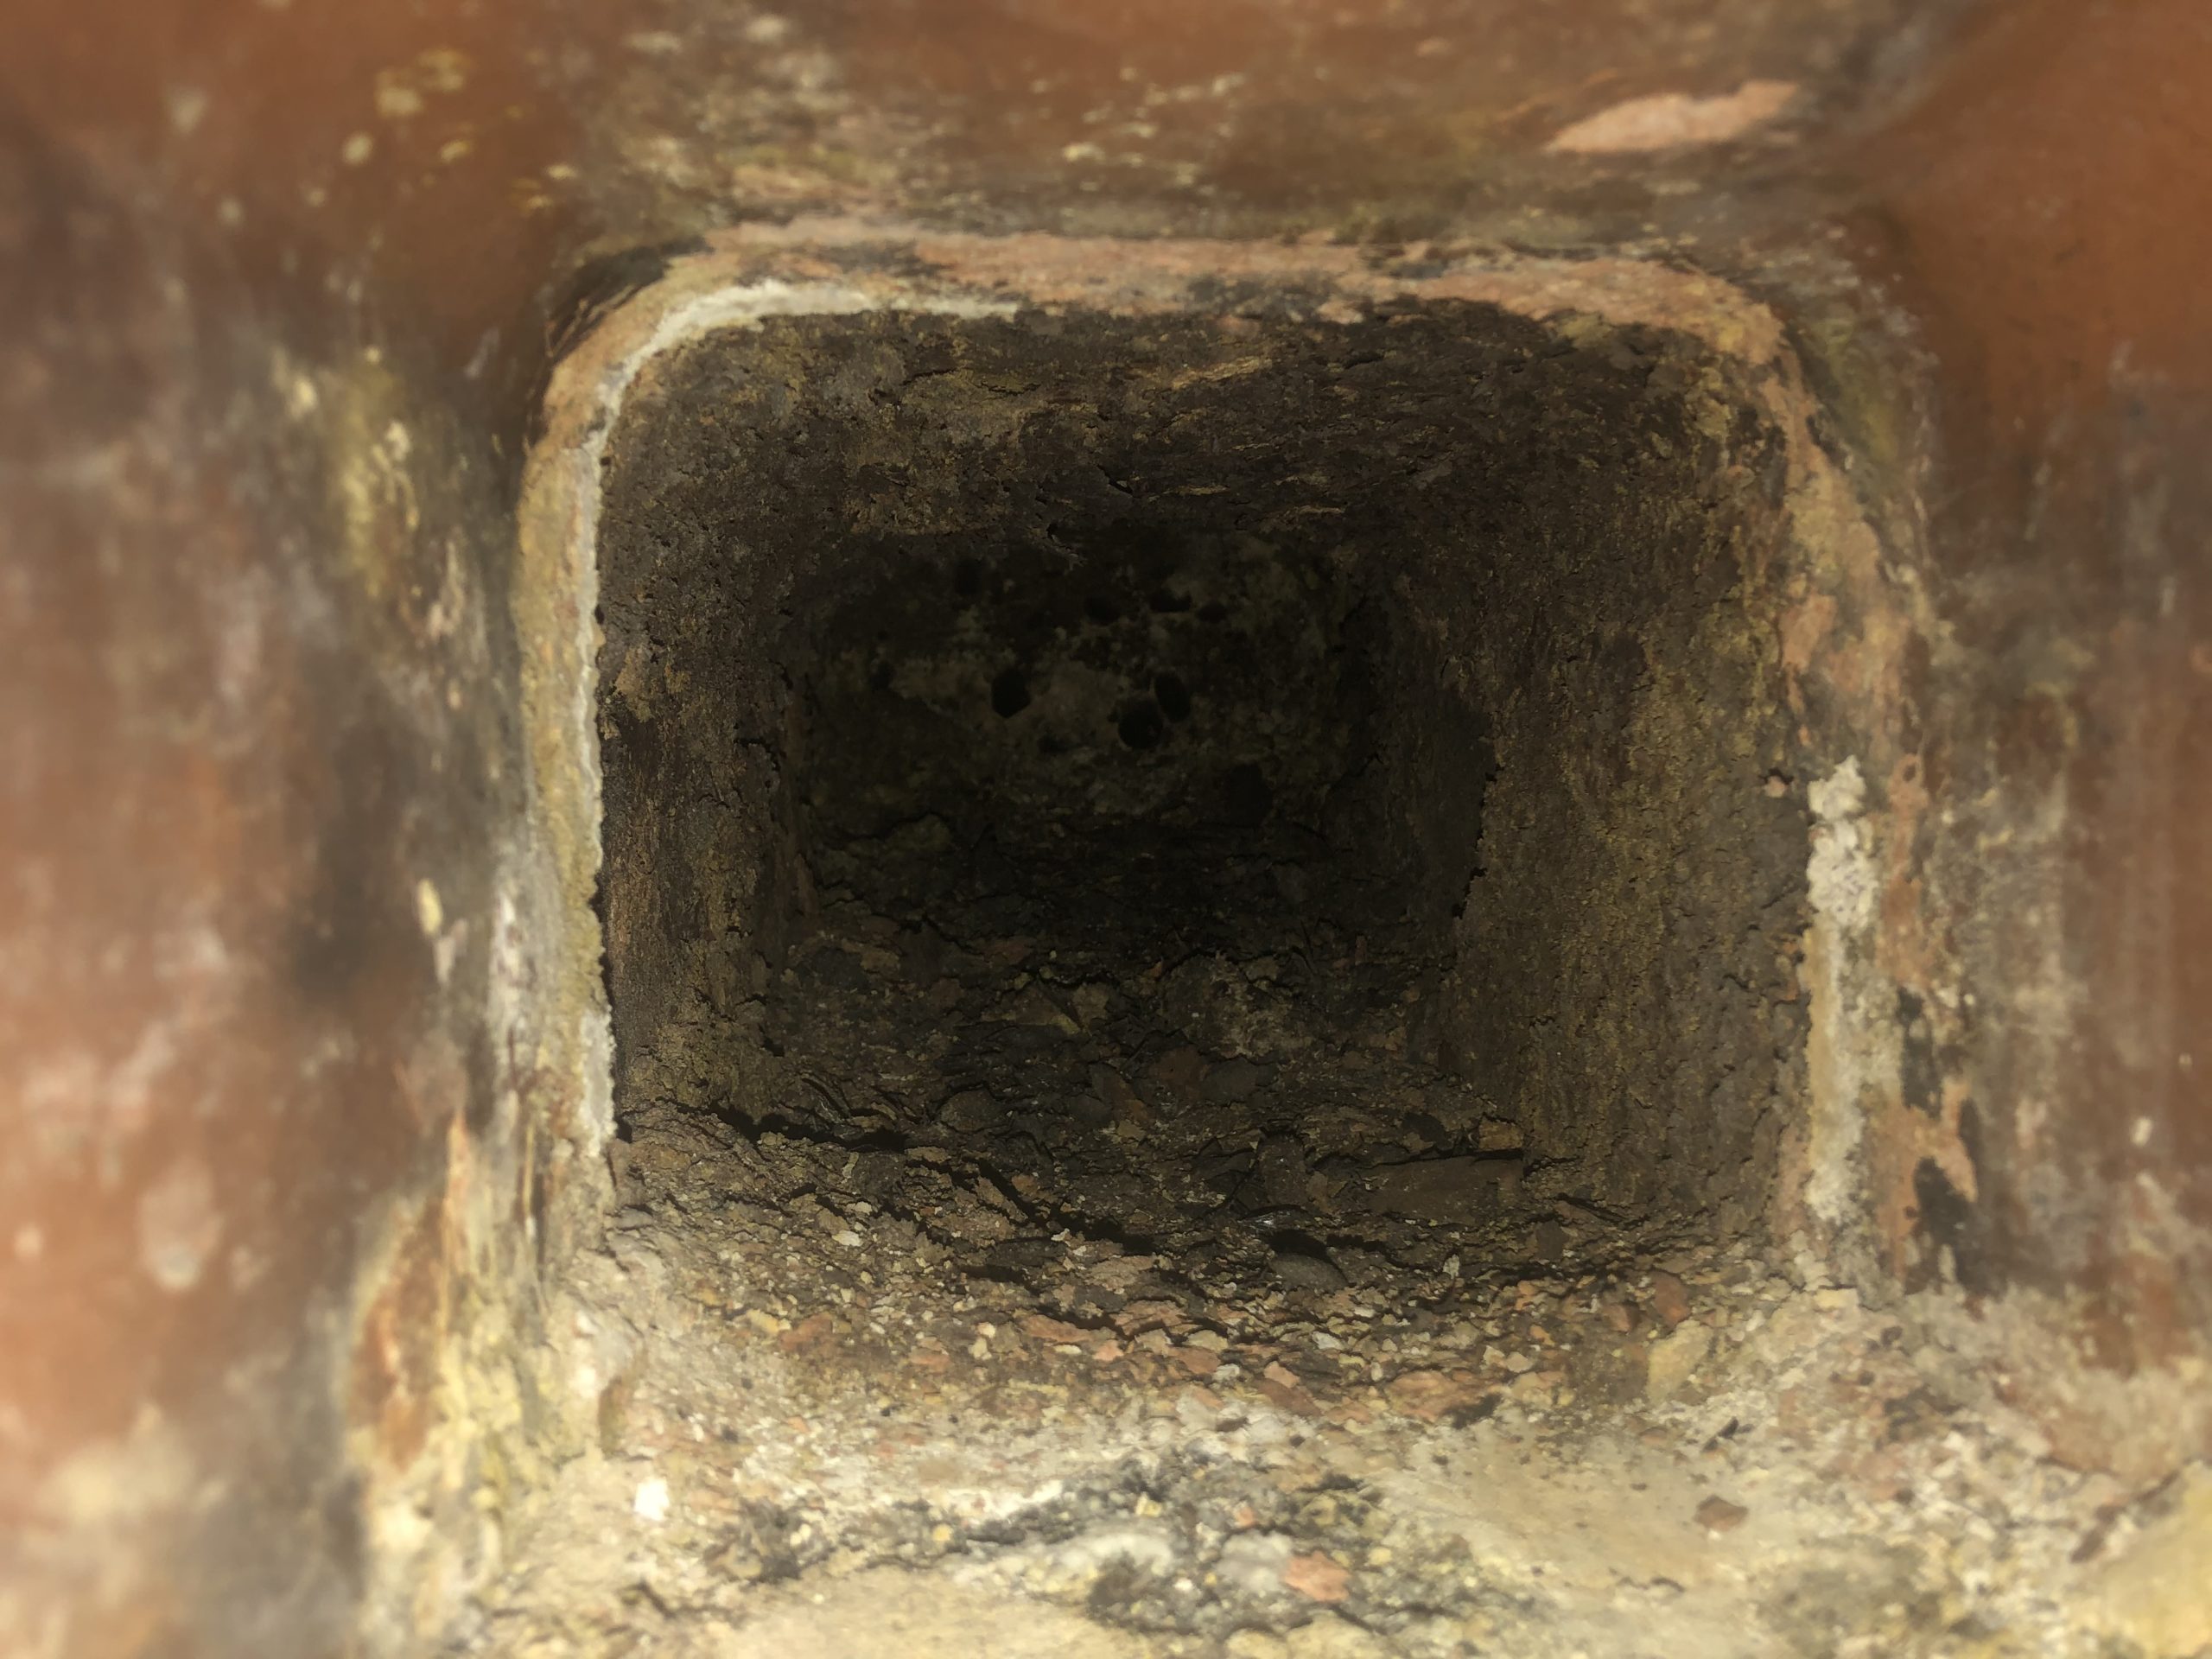 Creosote build-up in chimneys can lead to fires, which is why it's important to have chimney swept once a year.